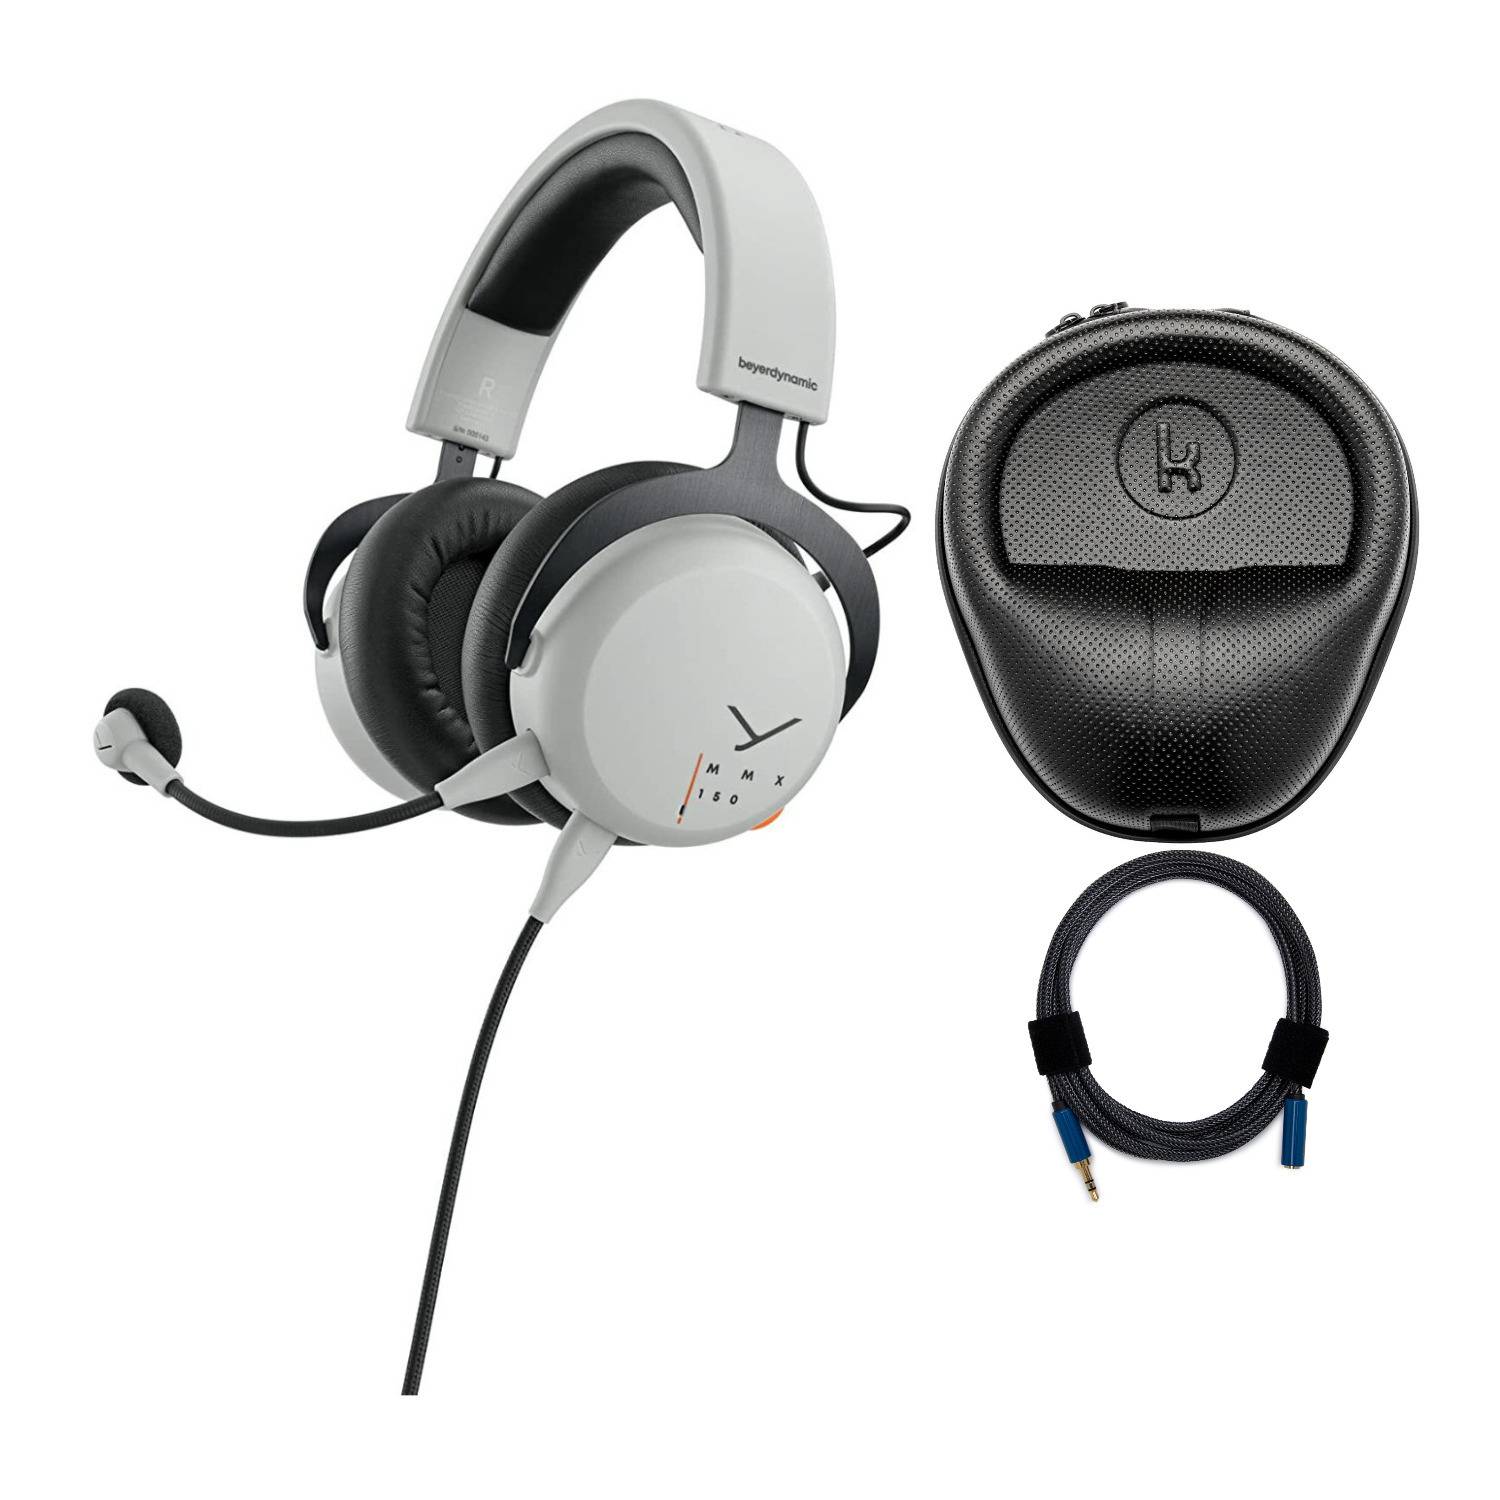 Beyerdynamic MMX 150 Gray Gaming Headset with Headphone Case (Medium) and Audio Adapter Cable